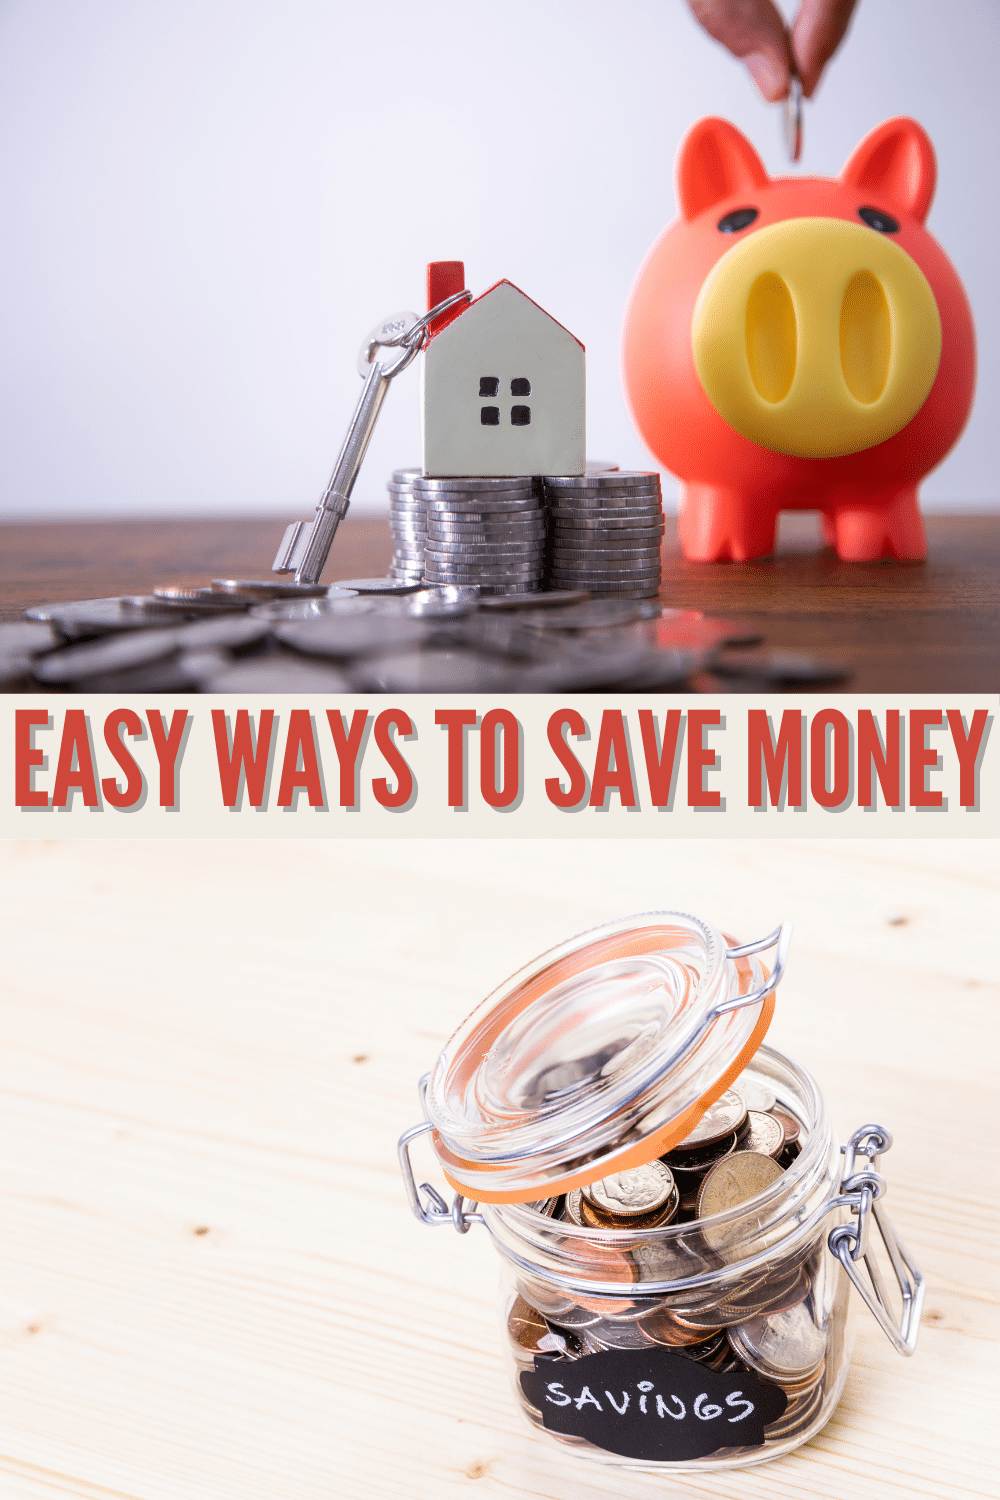 Easy ways to save money you can start using right now without making dramatic changes to your lifestyle. #savings #money via @wondermomwannab